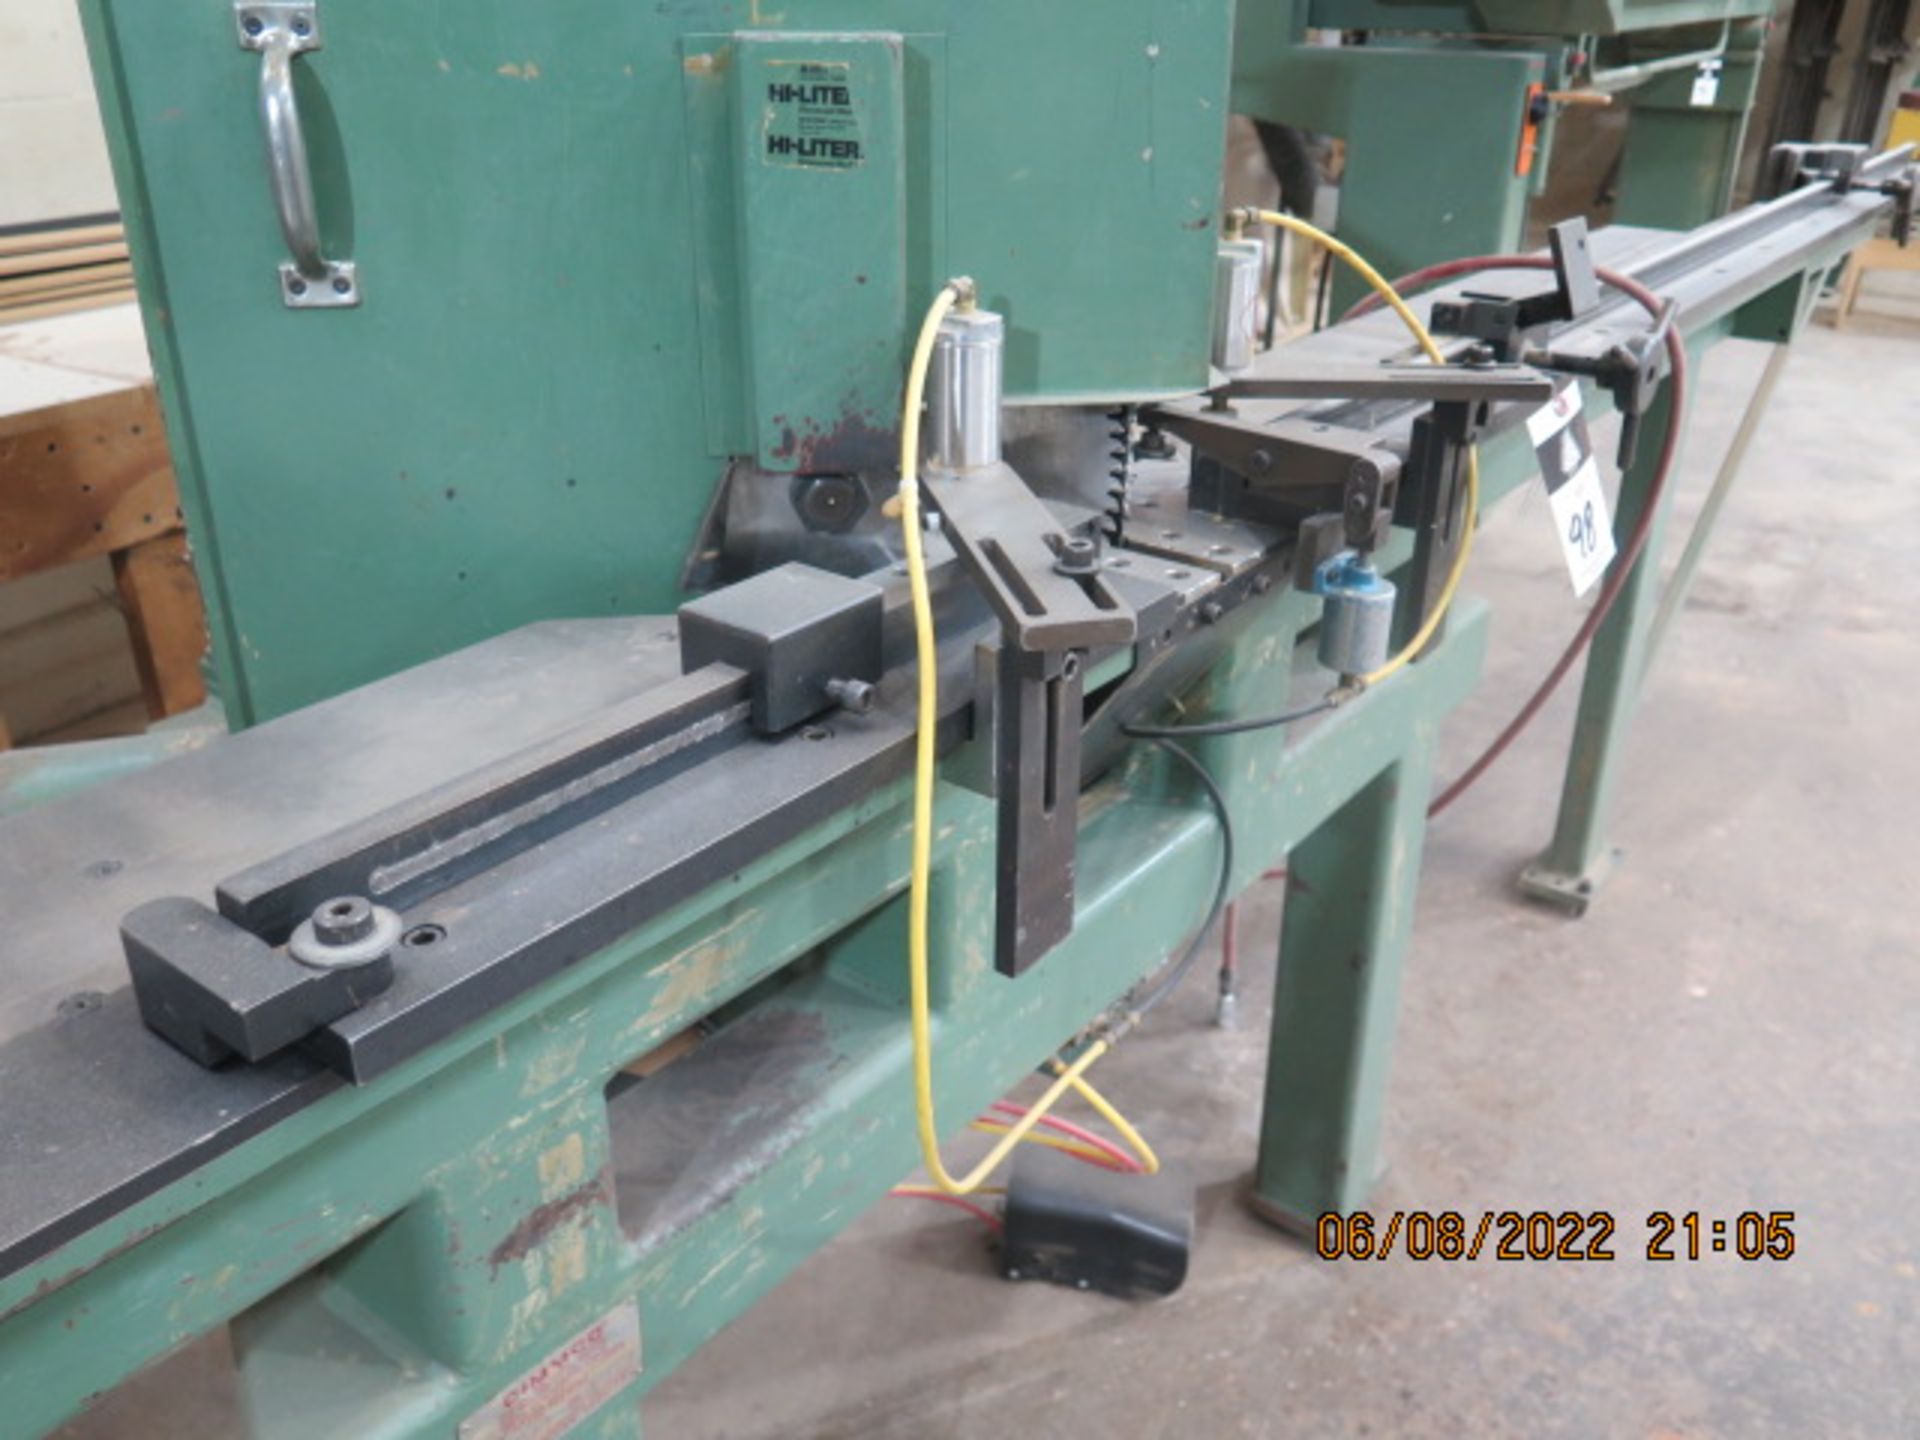 Cimmco DM100 Miter-Cut Saw s/n 8001 w/ Pneumatic Clamping and Feed, Fence System, SOLD AS IS - Image 5 of 10